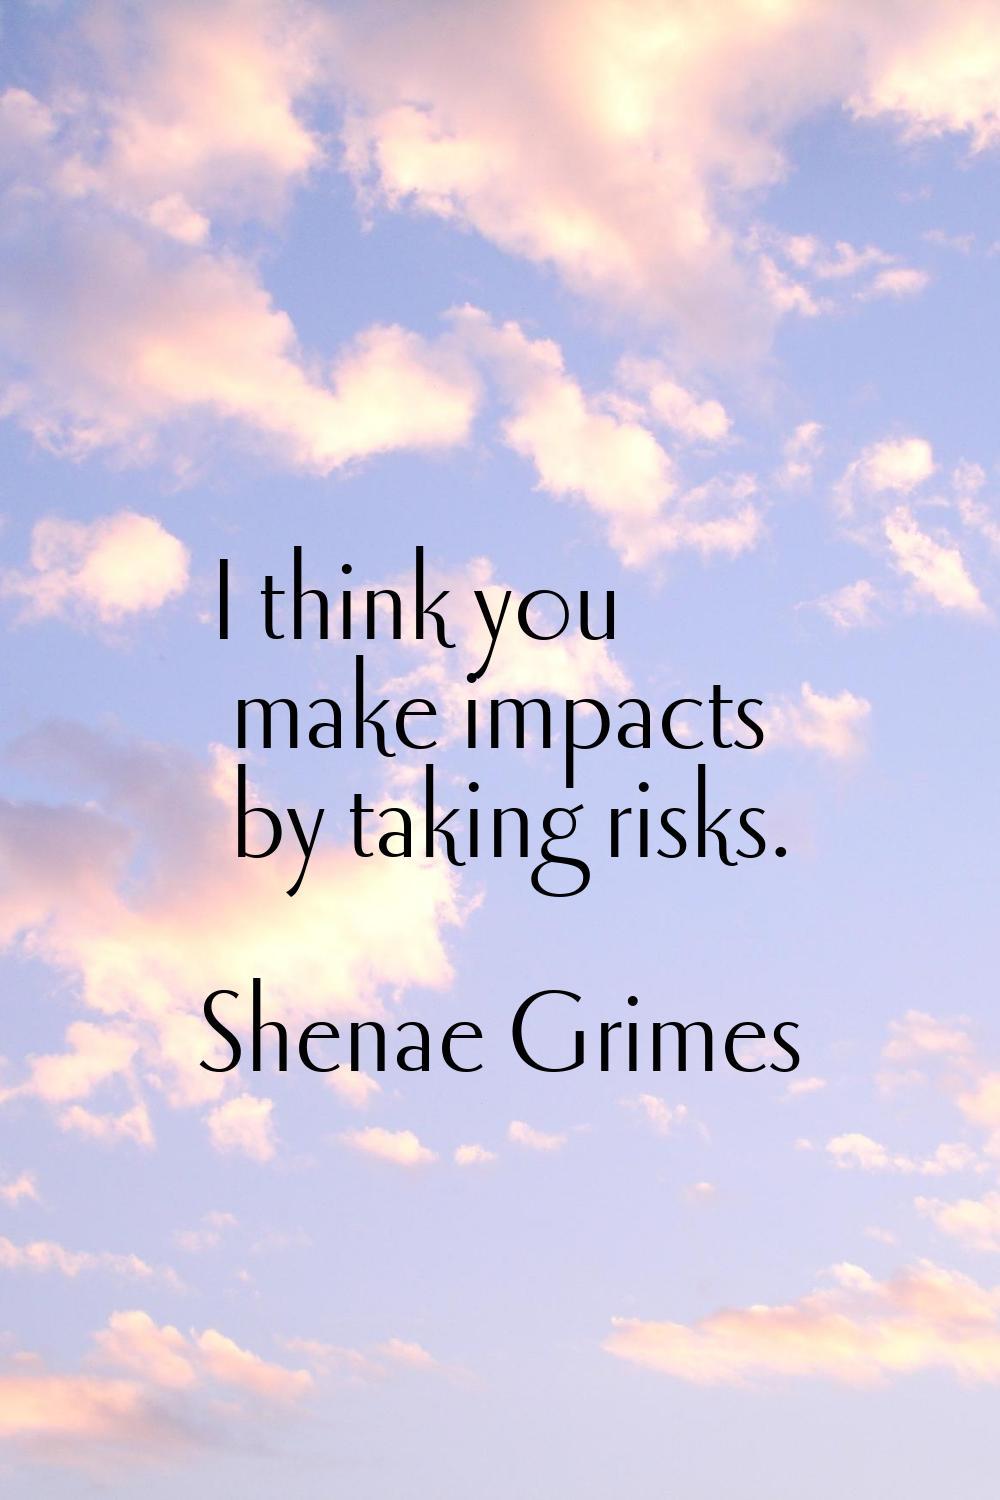 I think you make impacts by taking risks.